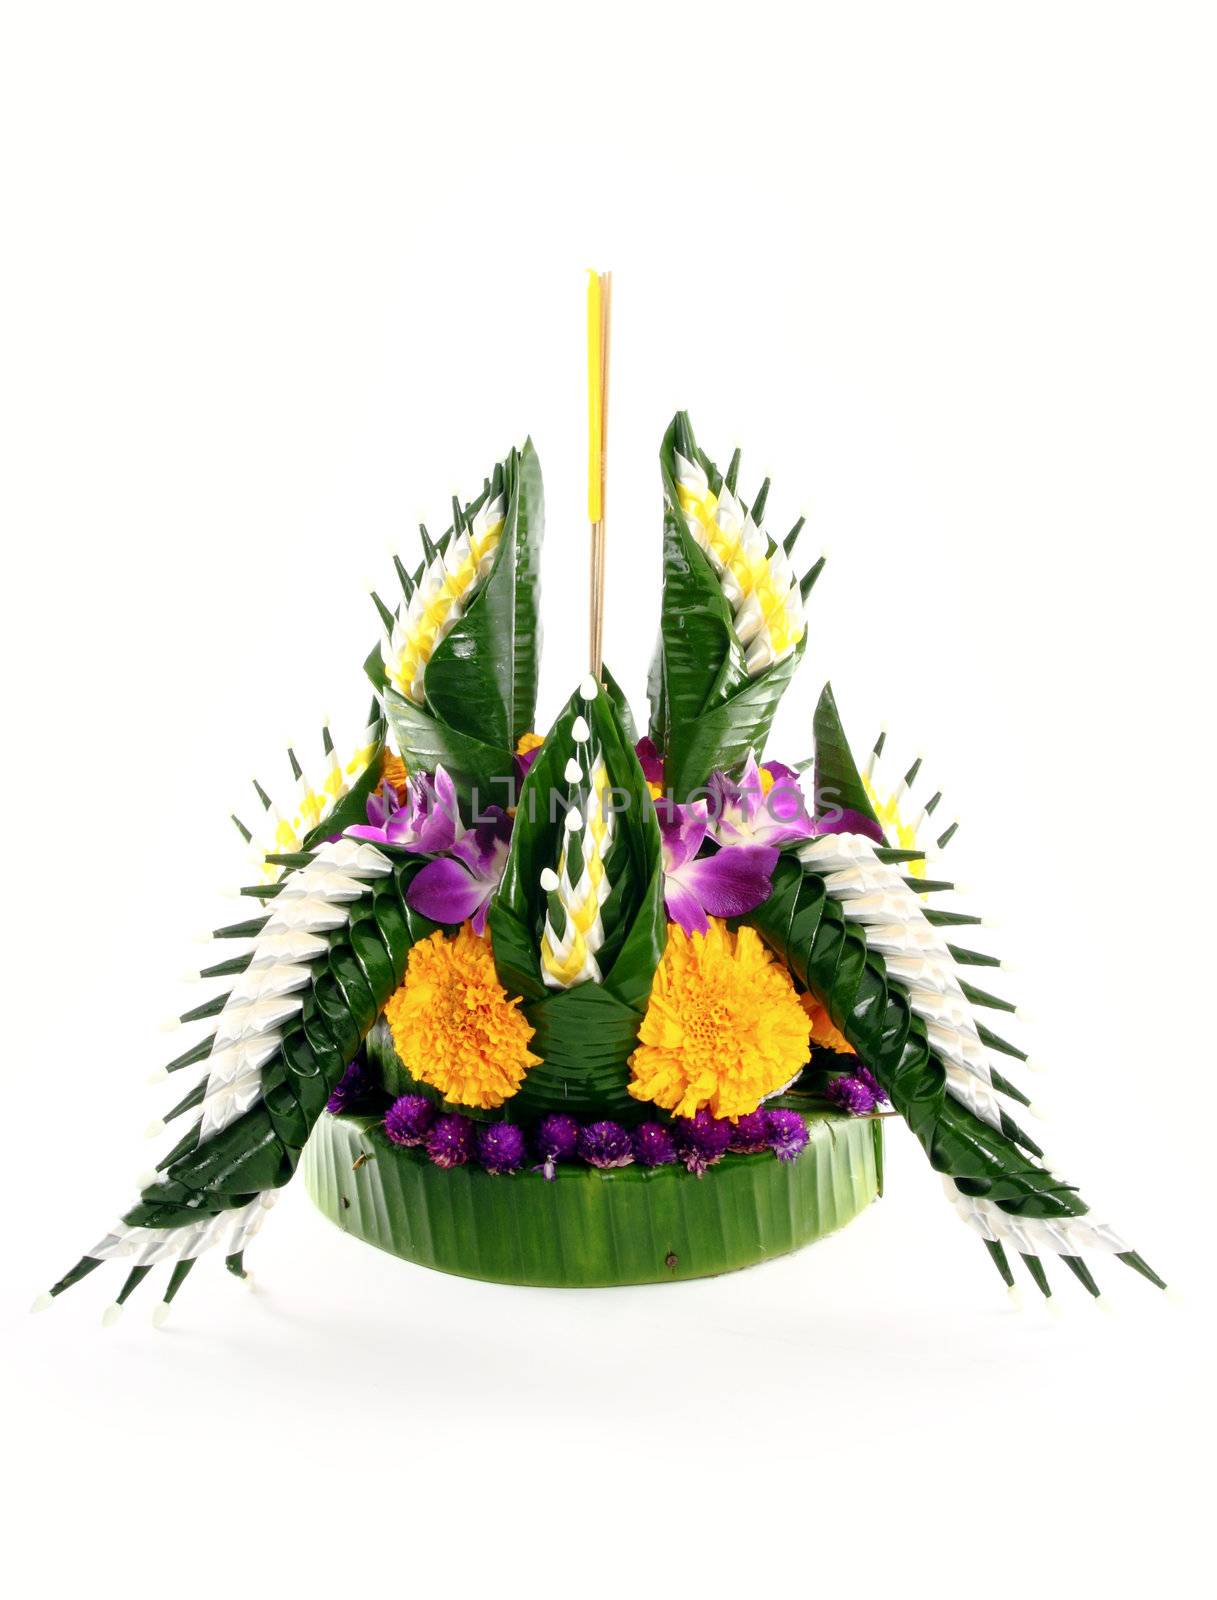 Loy kratong Festival in Thailand, on white background